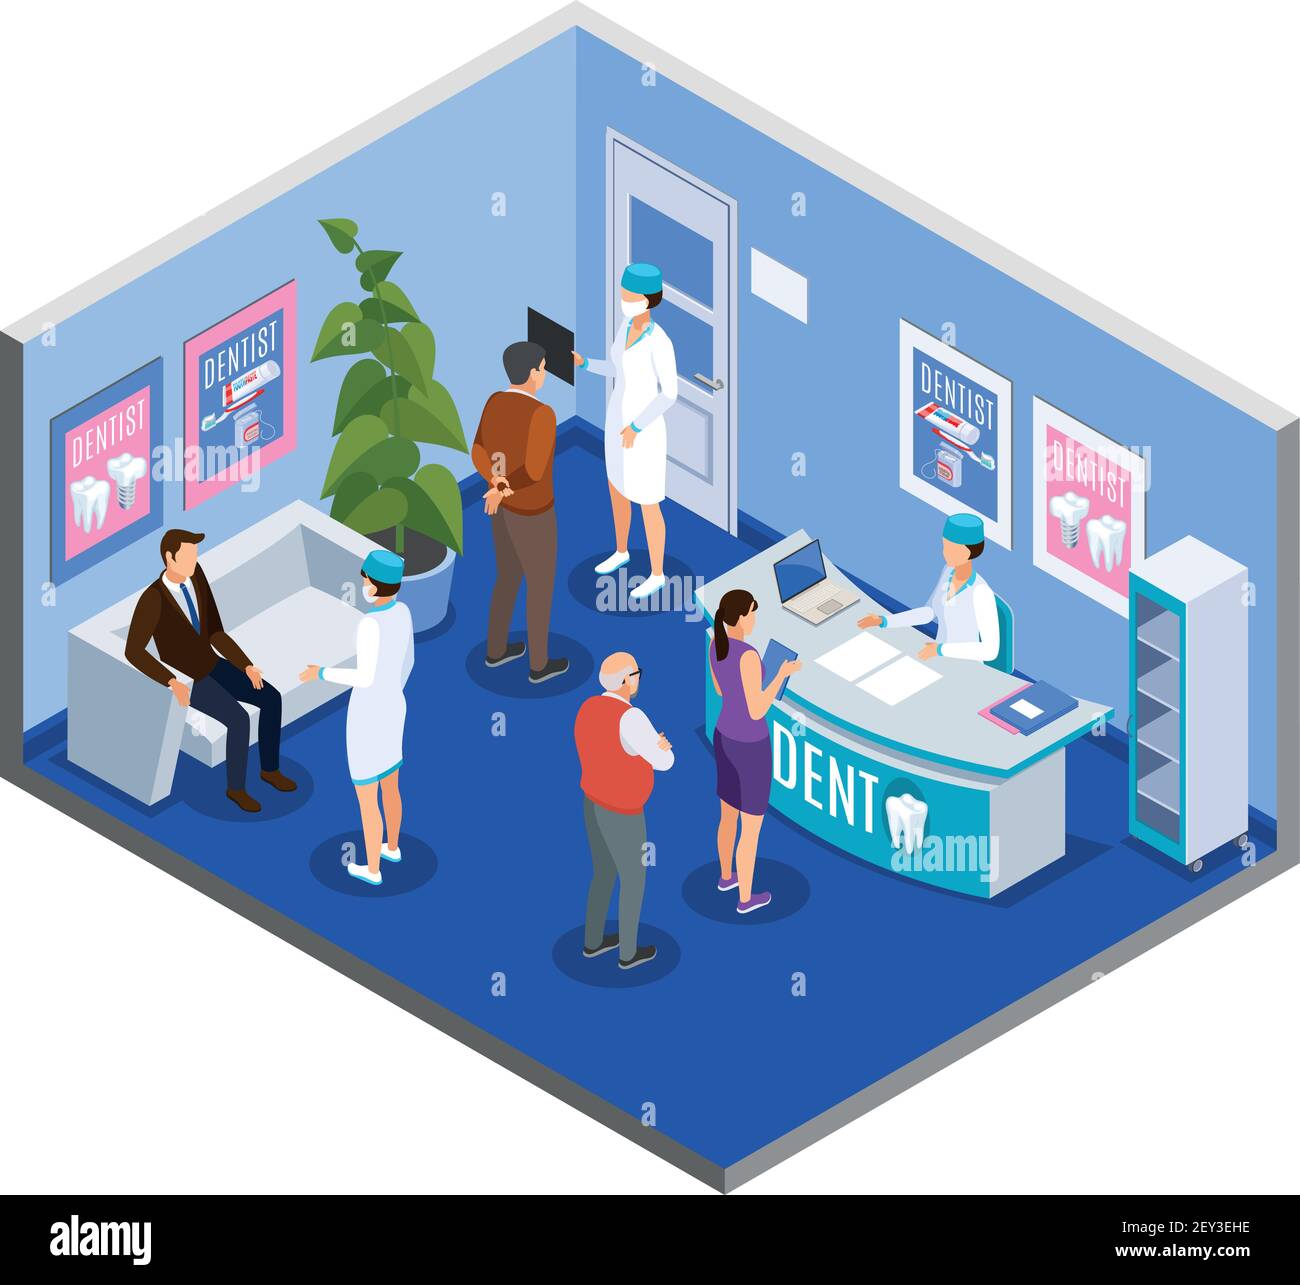 Dental clinic practice reception area waiting room isometric composition with patients at desk making appointment vector illustration Stock Vector